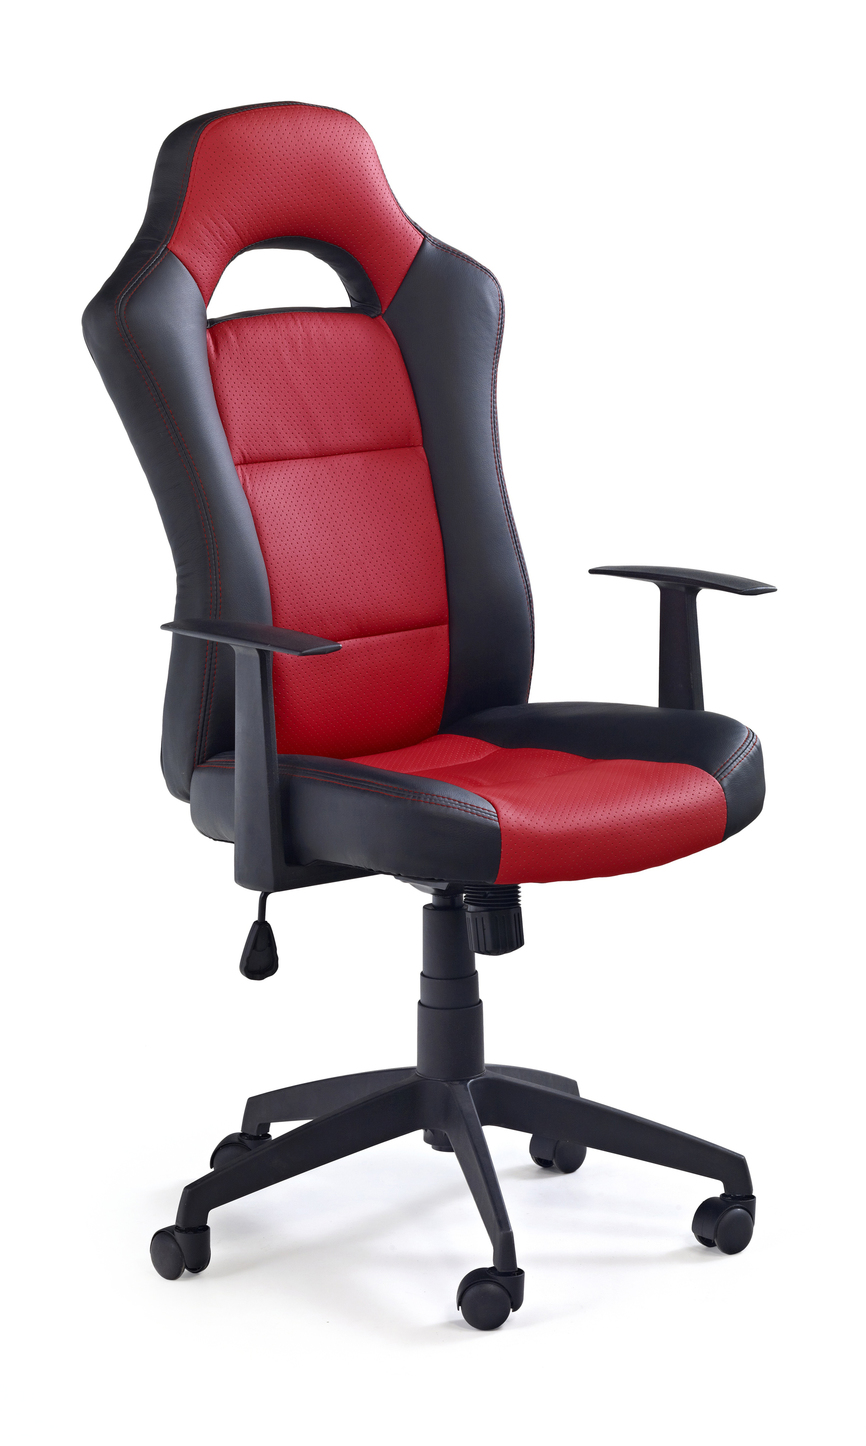 RACER 2 chair color: black/red